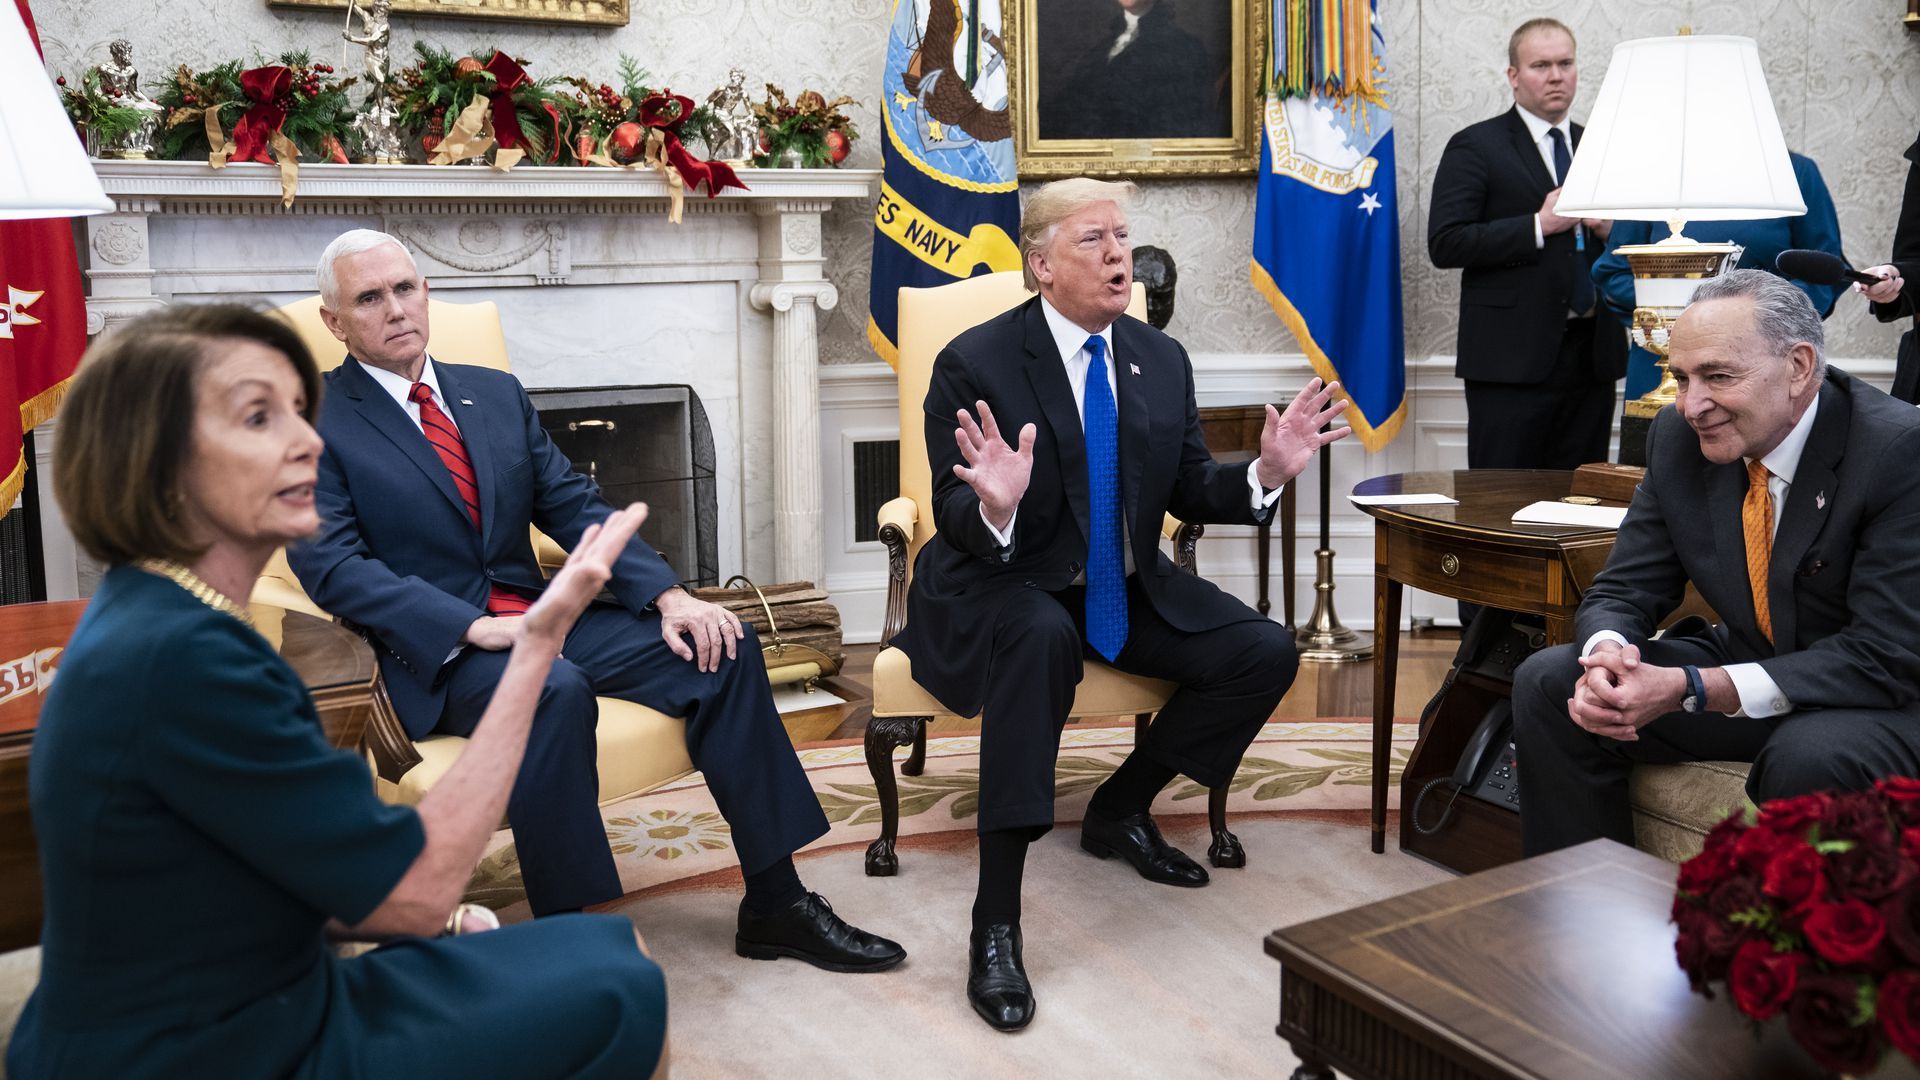 Trump with Pence, Pelosi and Schumer